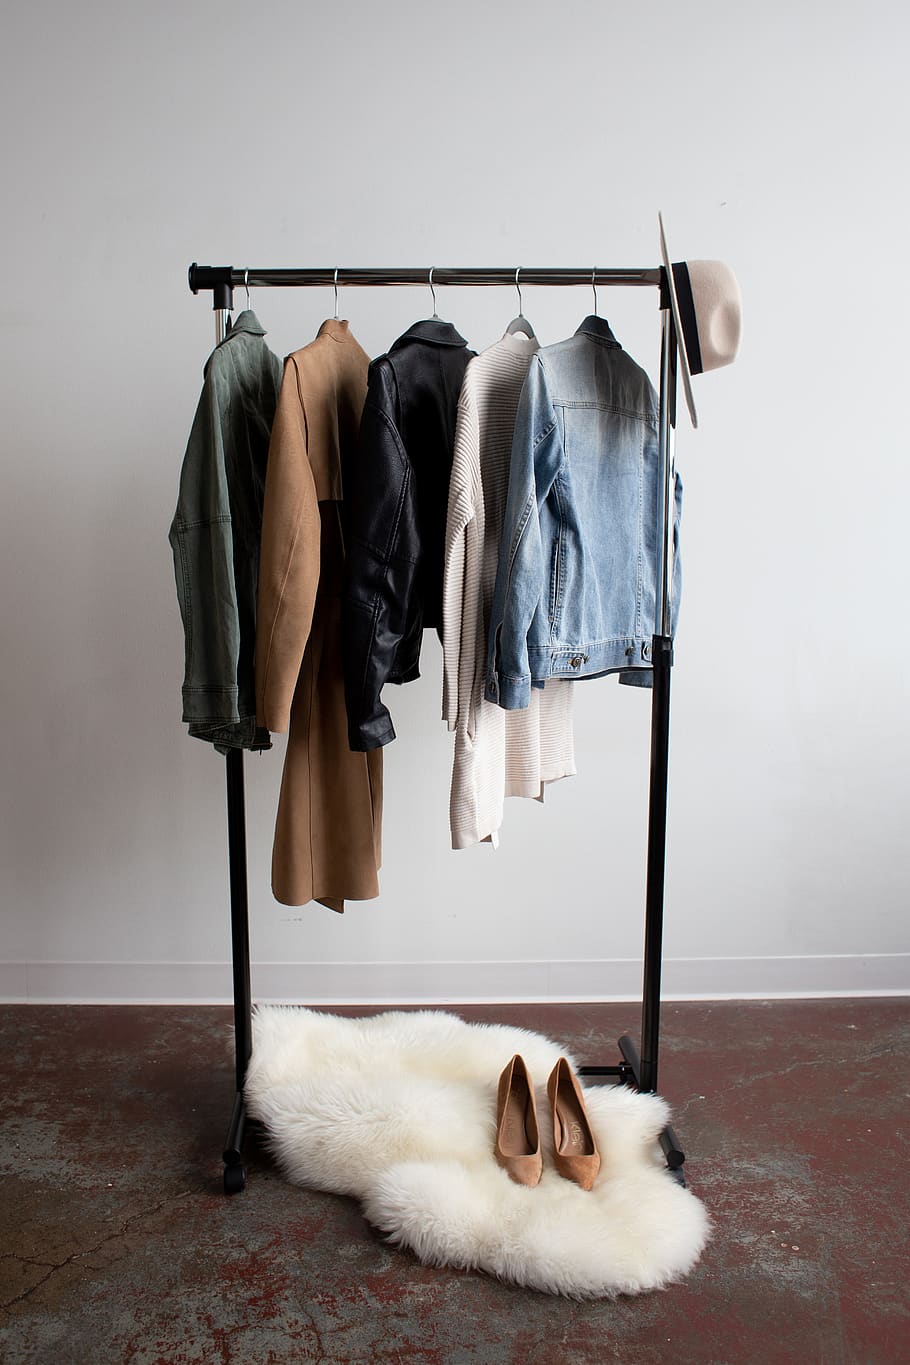 five jackets on clothes rack, domestic animals, animal themes